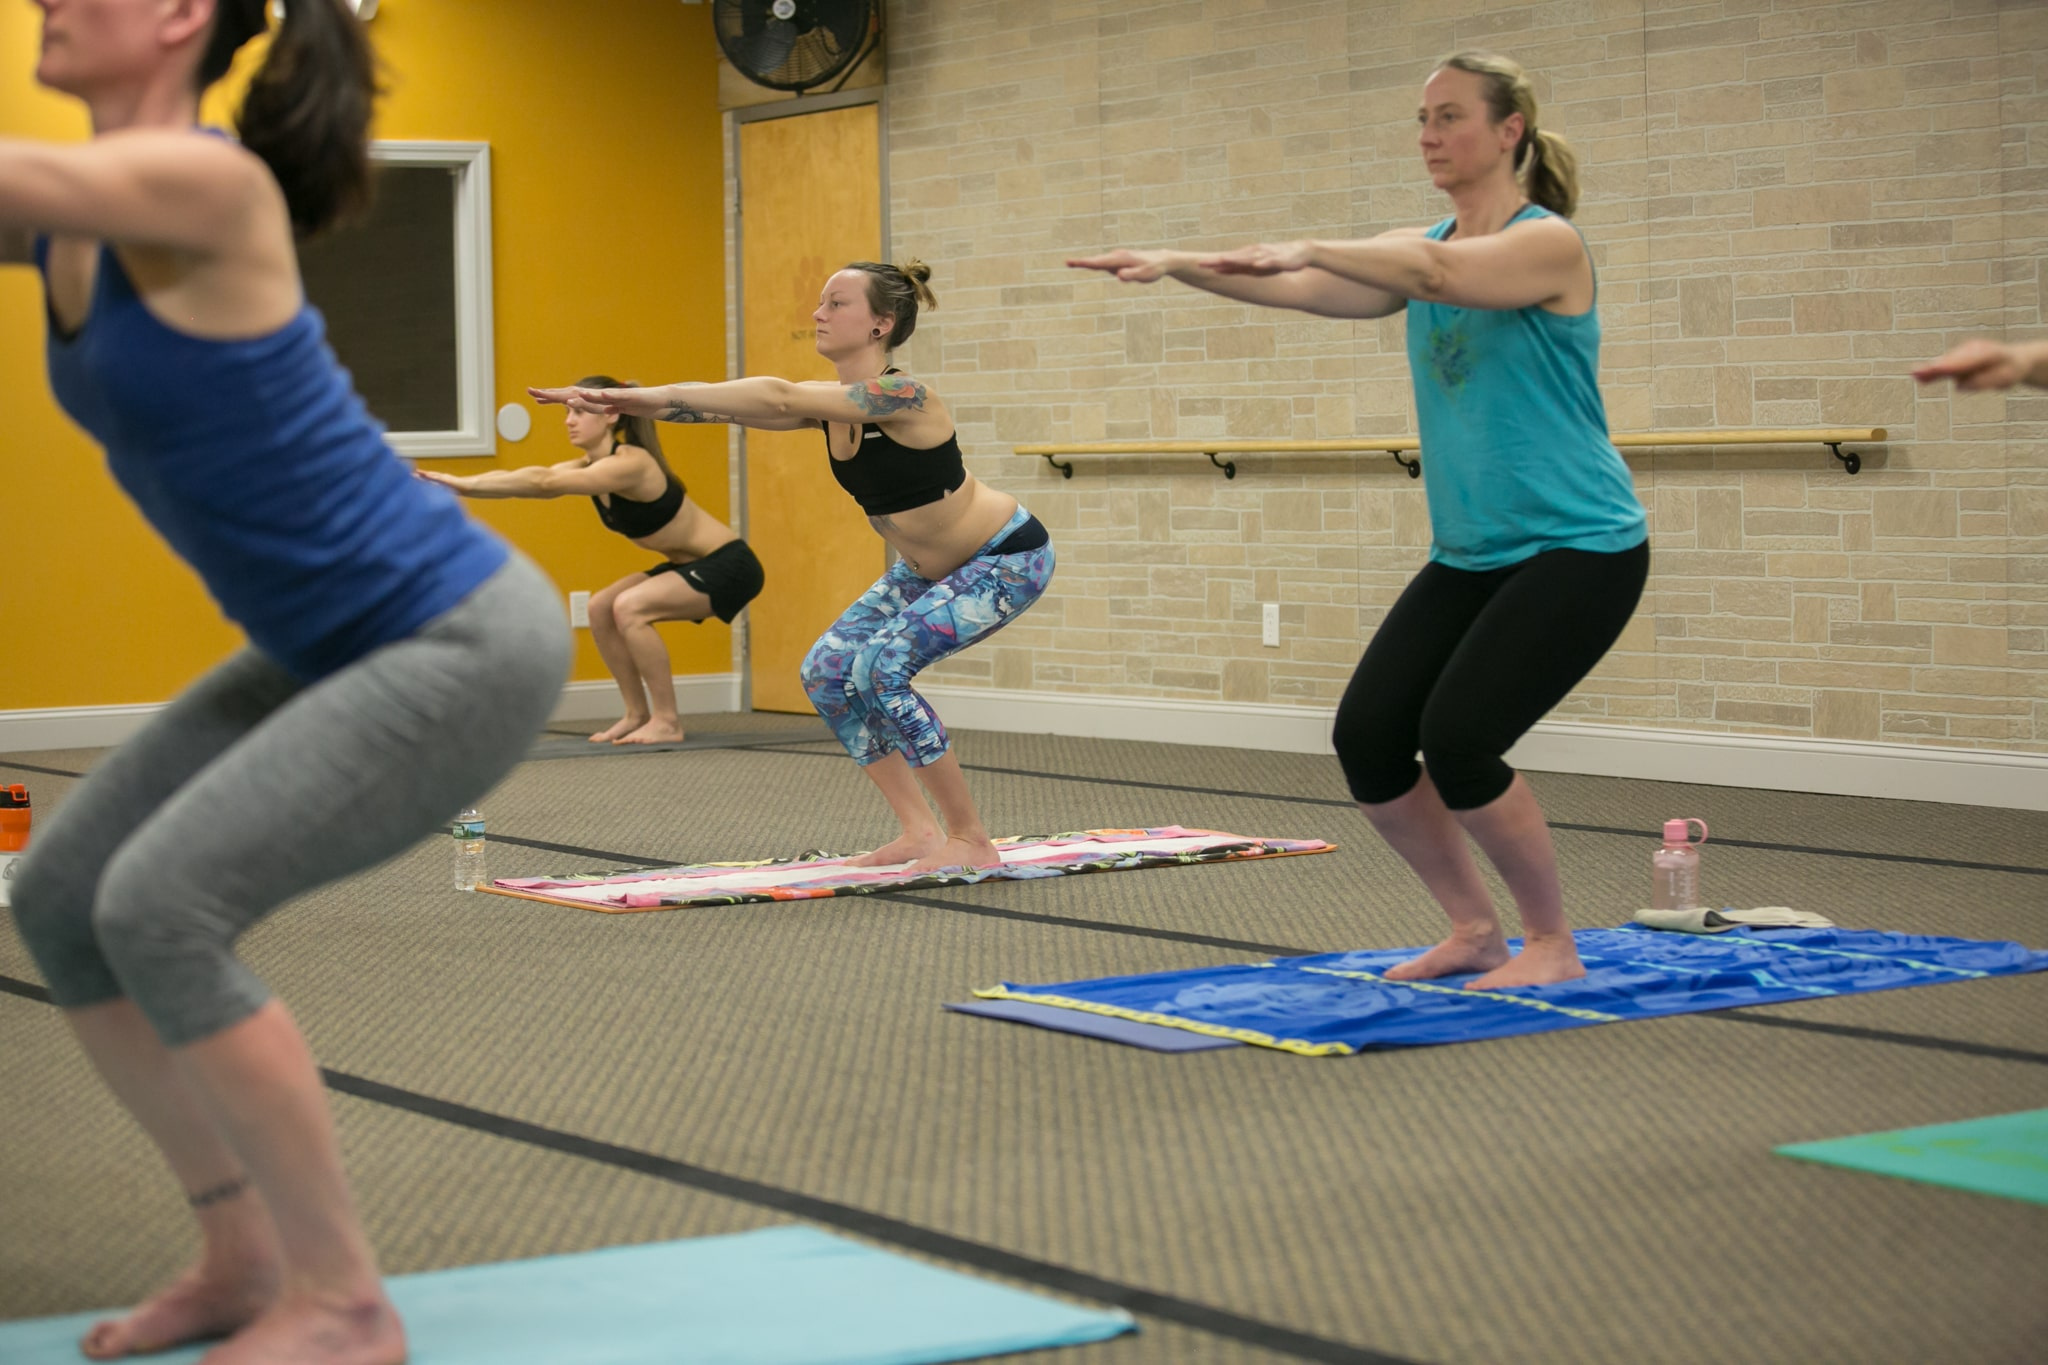 Yoga Practitioners in a Studio 8